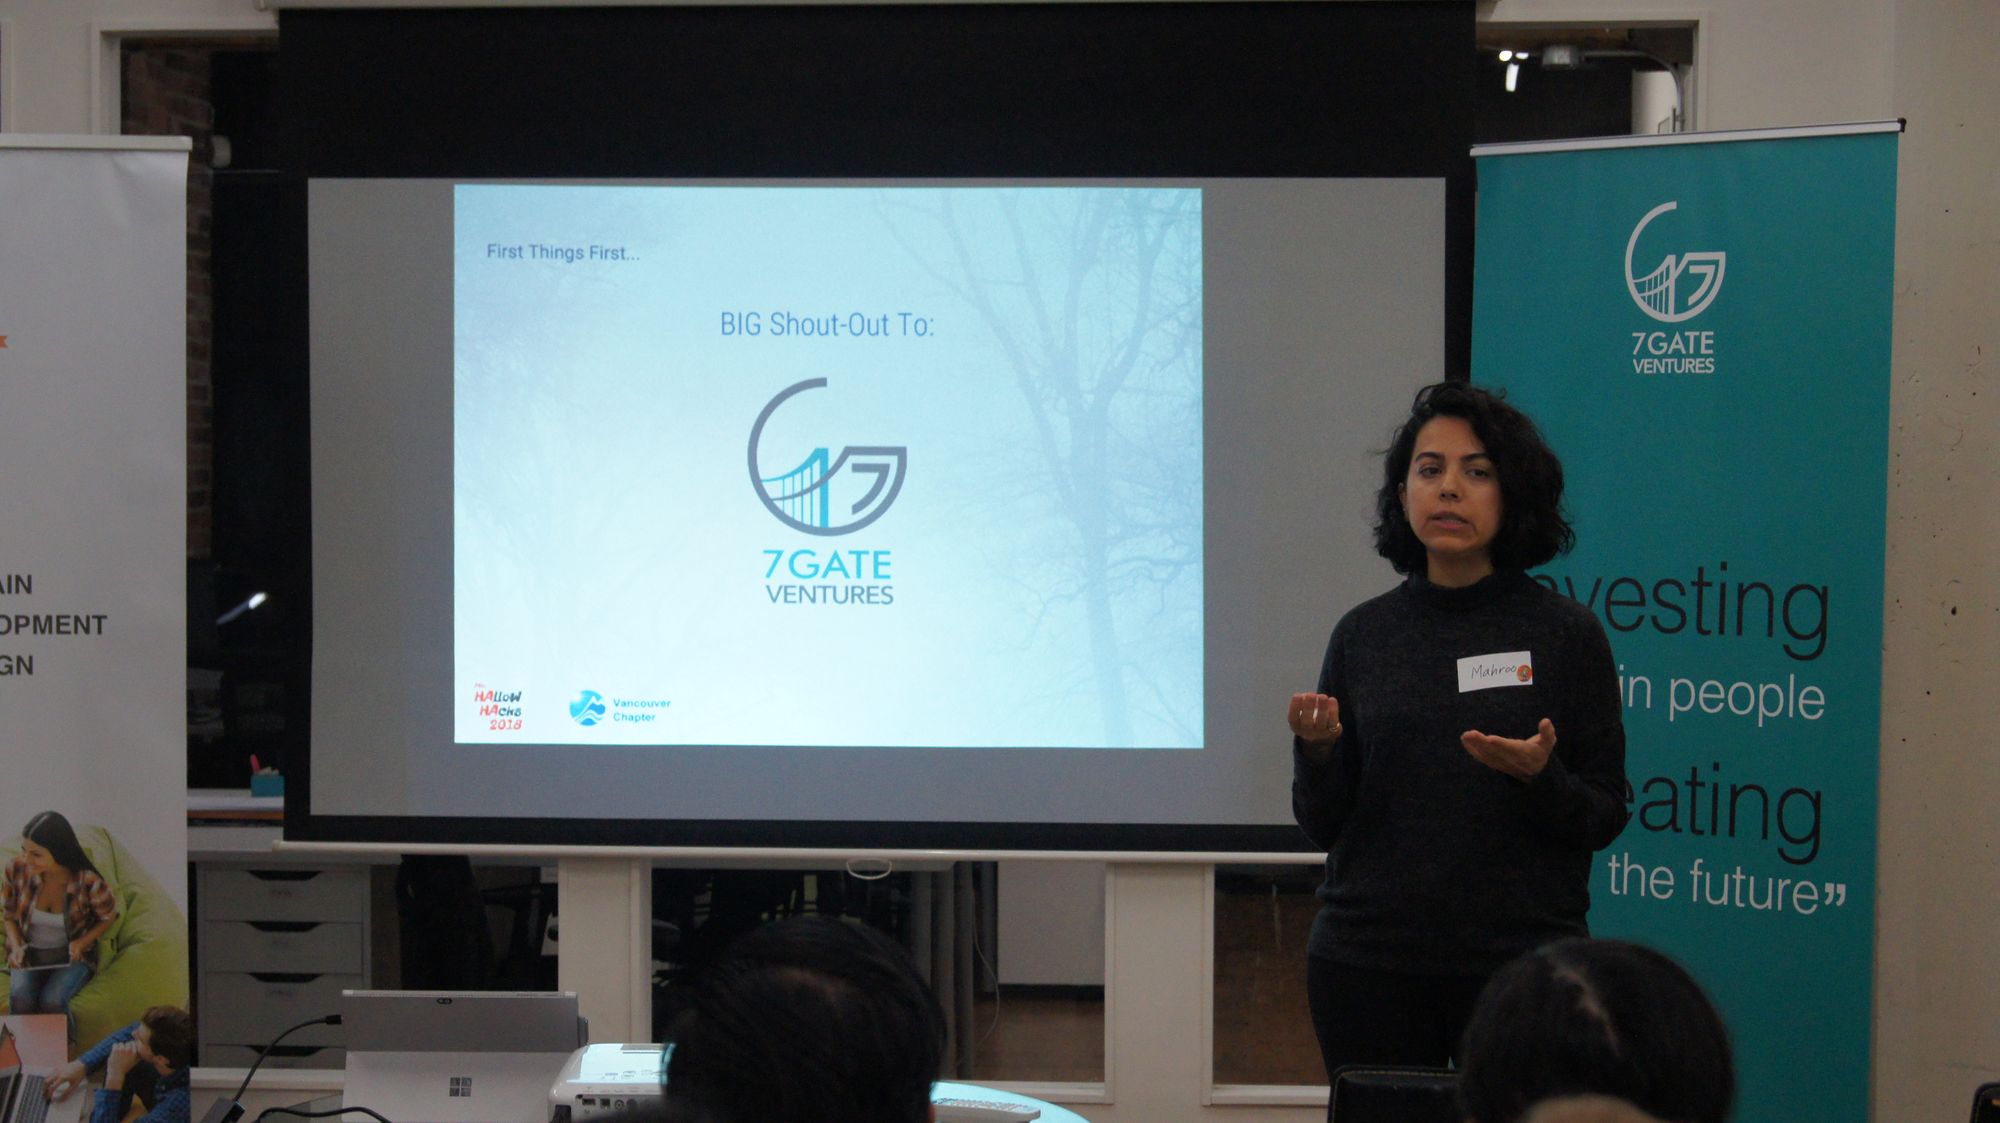 Mahroo gives her welcoming remarks on behalf of 7Gate Ventures.